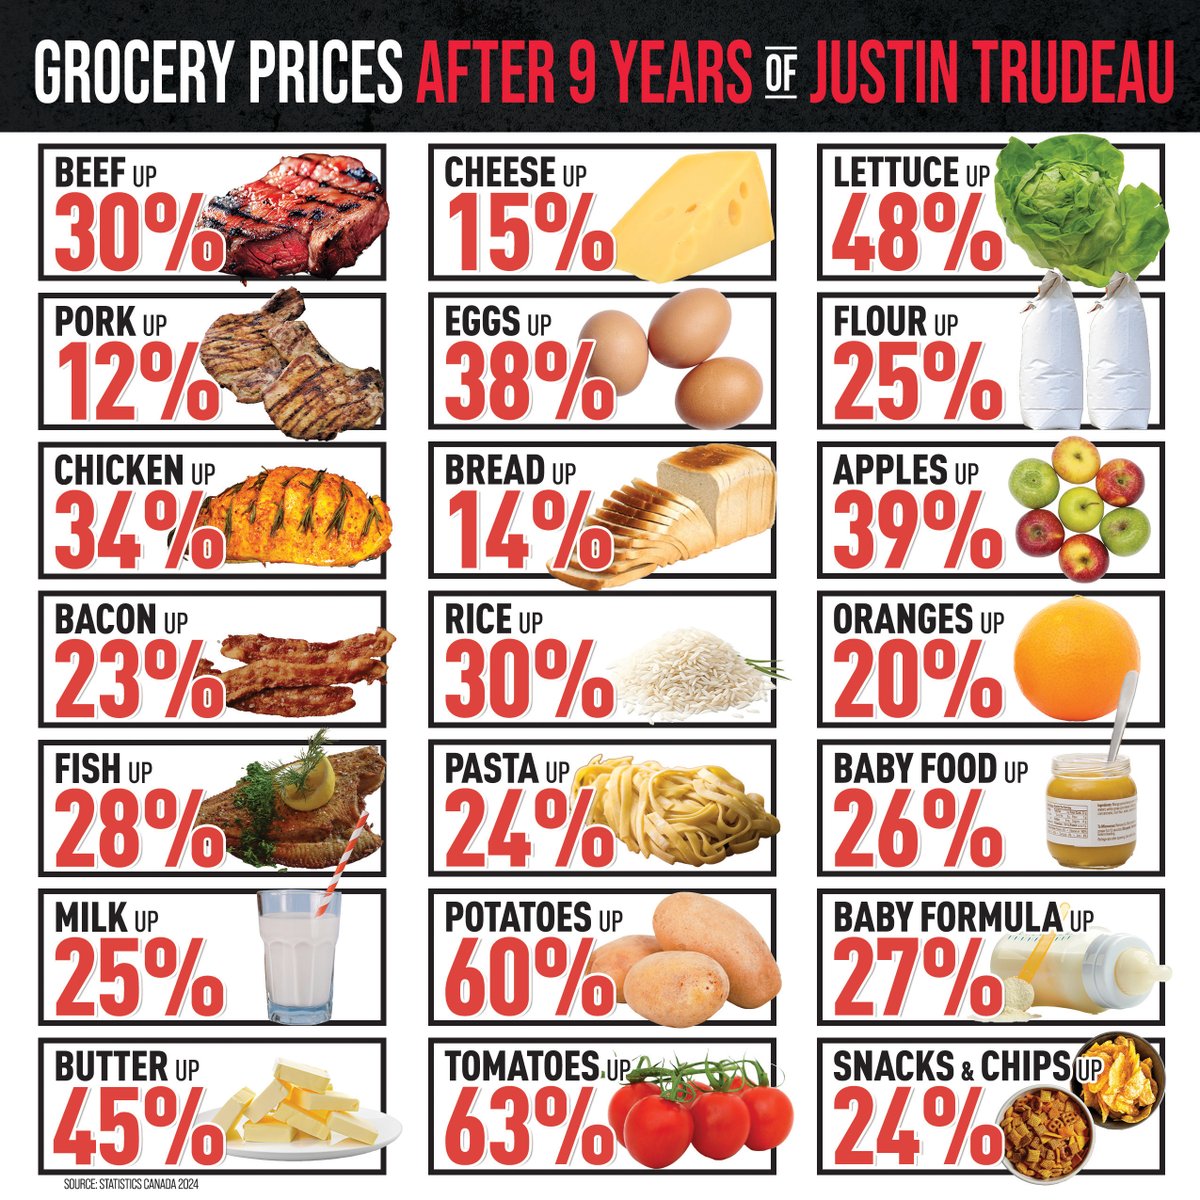 Trudeau & Singh. Not worth the cost of food.